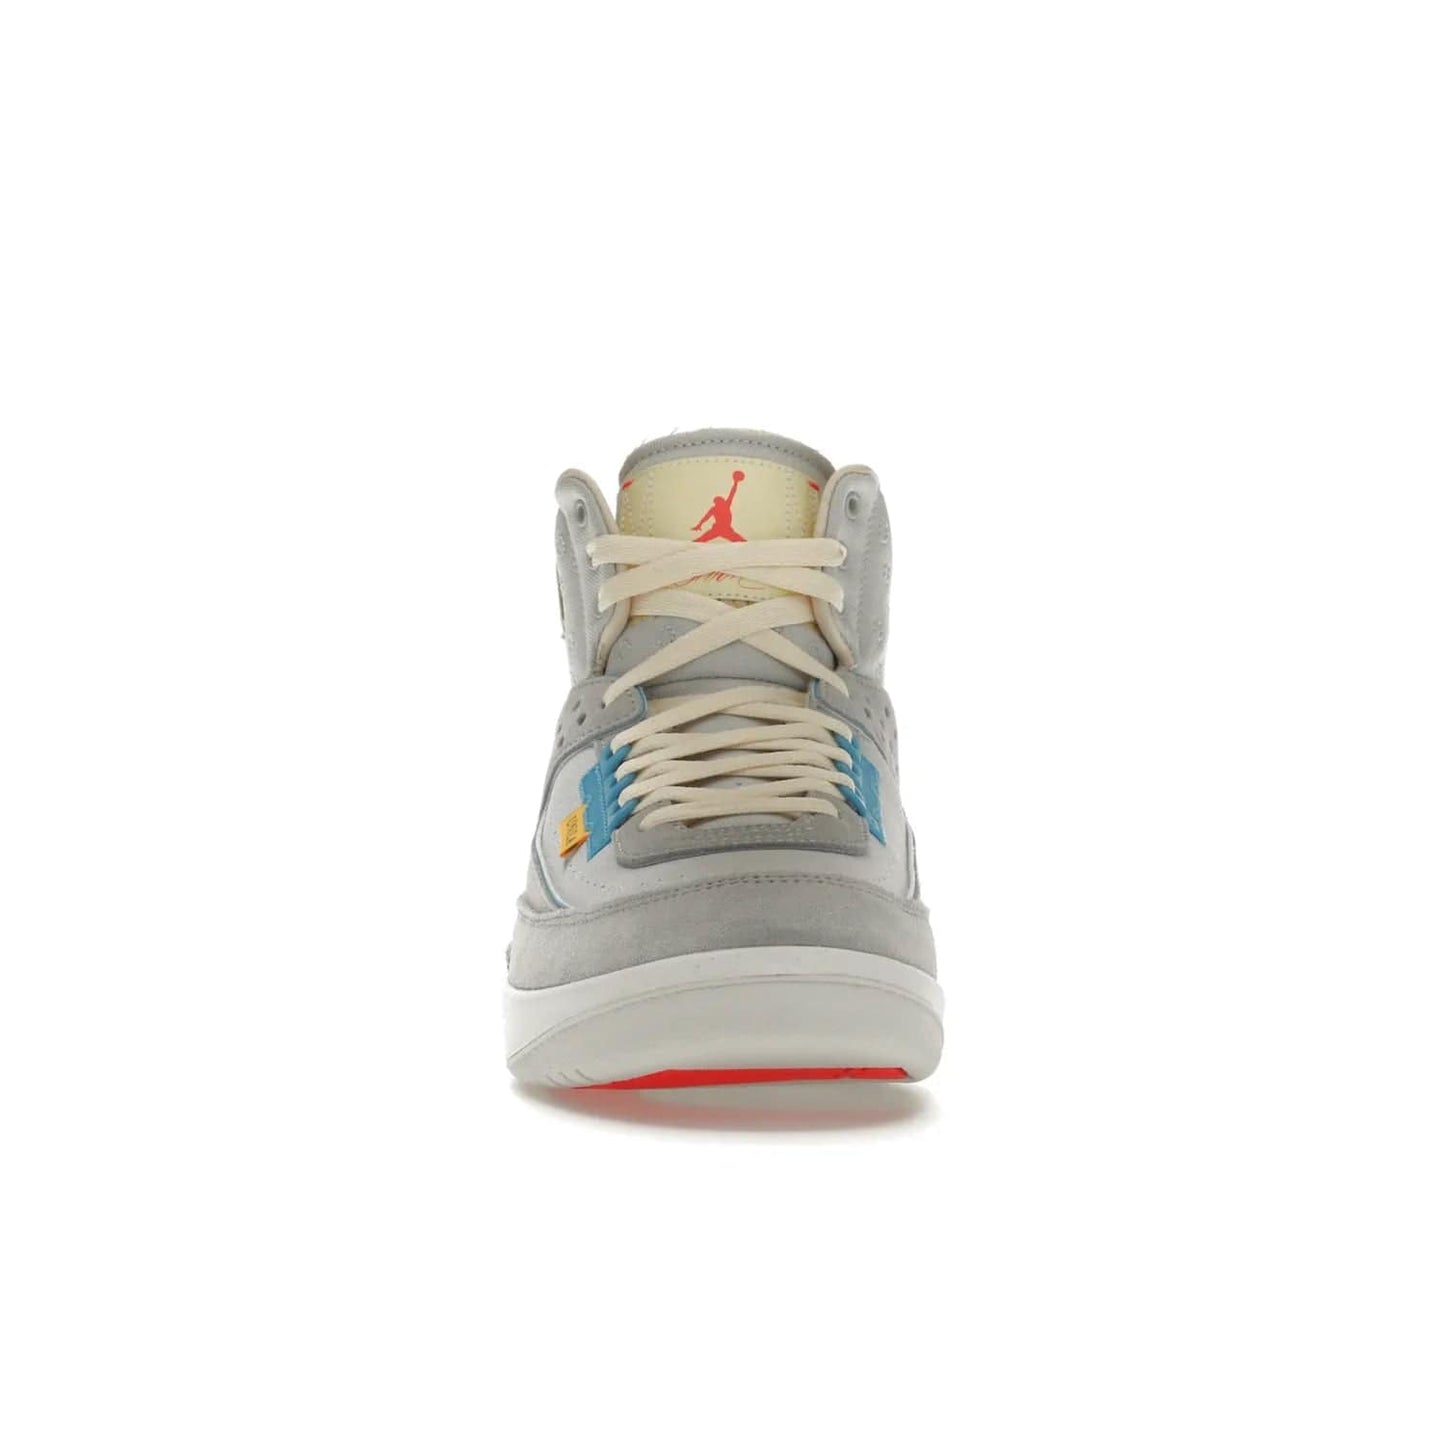 Jordan 2 Retro SP Union Grey Fog - Image 10 - Only at www.BallersClubKickz.com - Introducing the Air Jordan 2 Retro SP Union Grey Fog. This intricate sneaker design features a grey canvas upper with light blue eyelets, eyestay patches, and piping, plus custom external tags. Dropping in April 2022, this exclusive release offers a worn-in look and feel.